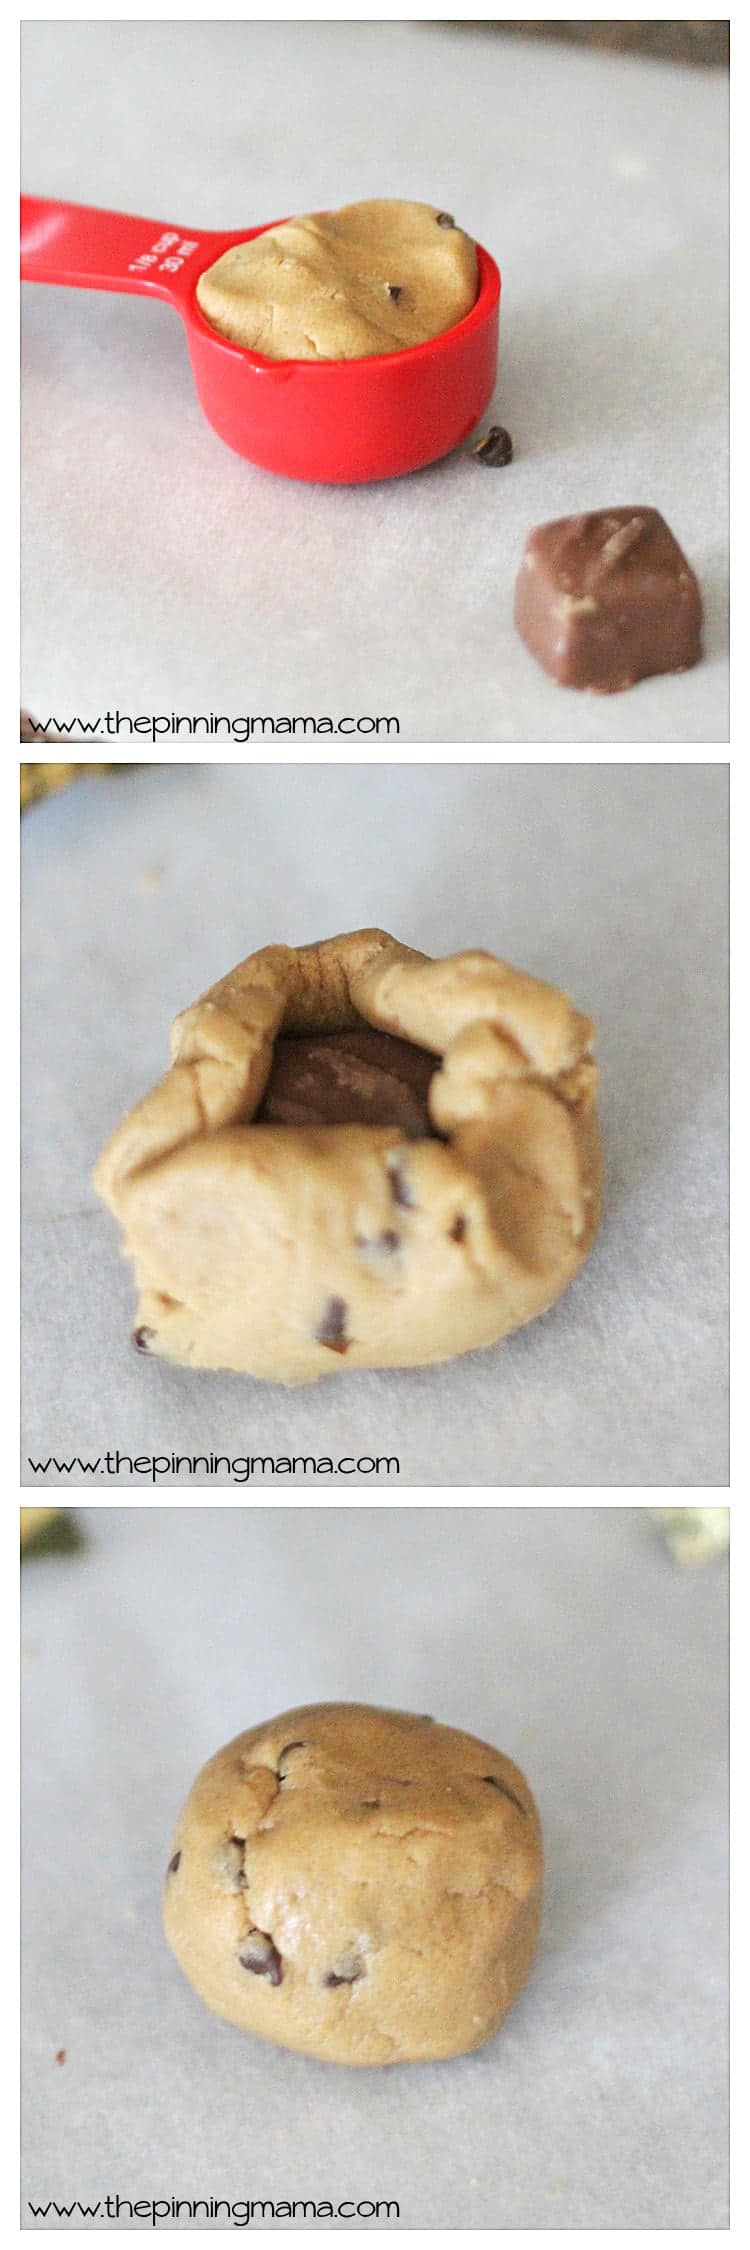 The Ultimate Game Day Recipe!!! Snickers Stuffed Chewy Chocolate Chip Cookies by www.thepinningmama.com #shop